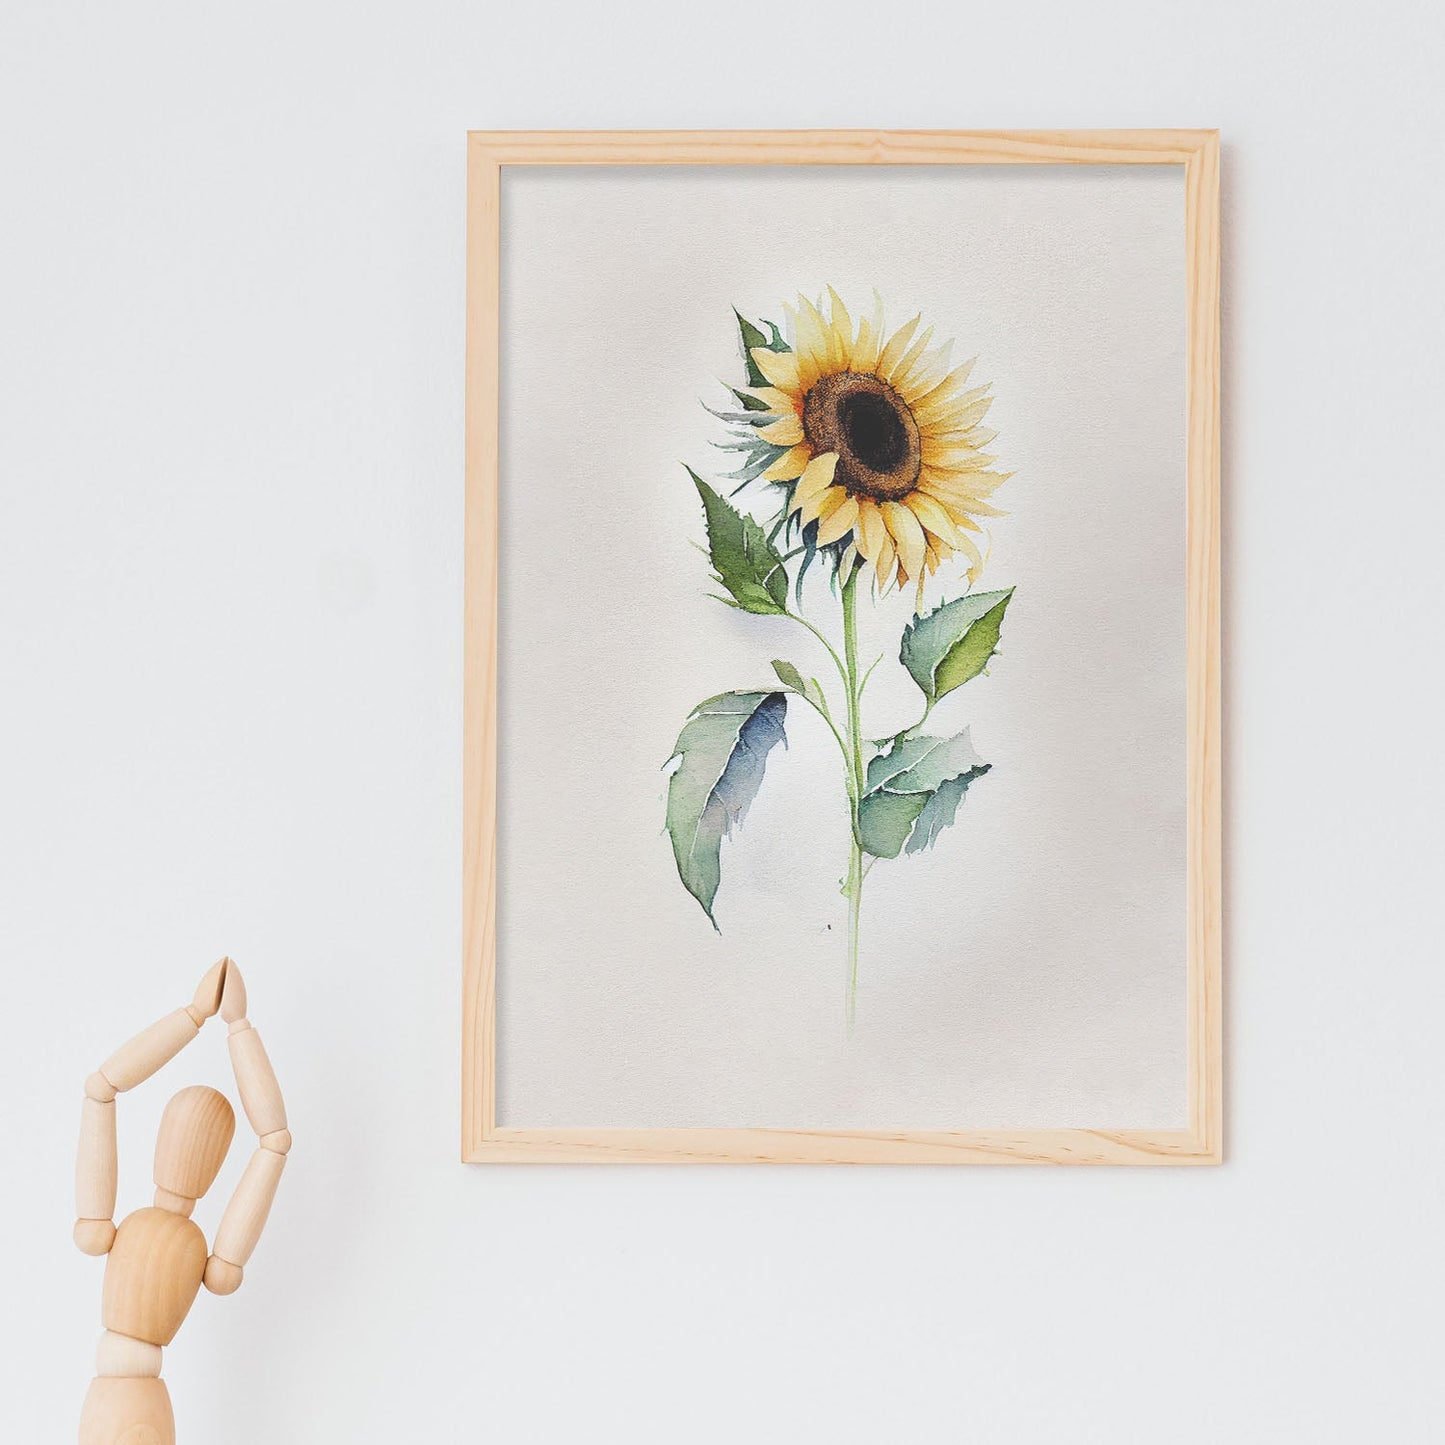 Nacnic watercolor minmal Sunflower_1. Aesthetic Wall Art Prints for Bedroom or Living Room Design.